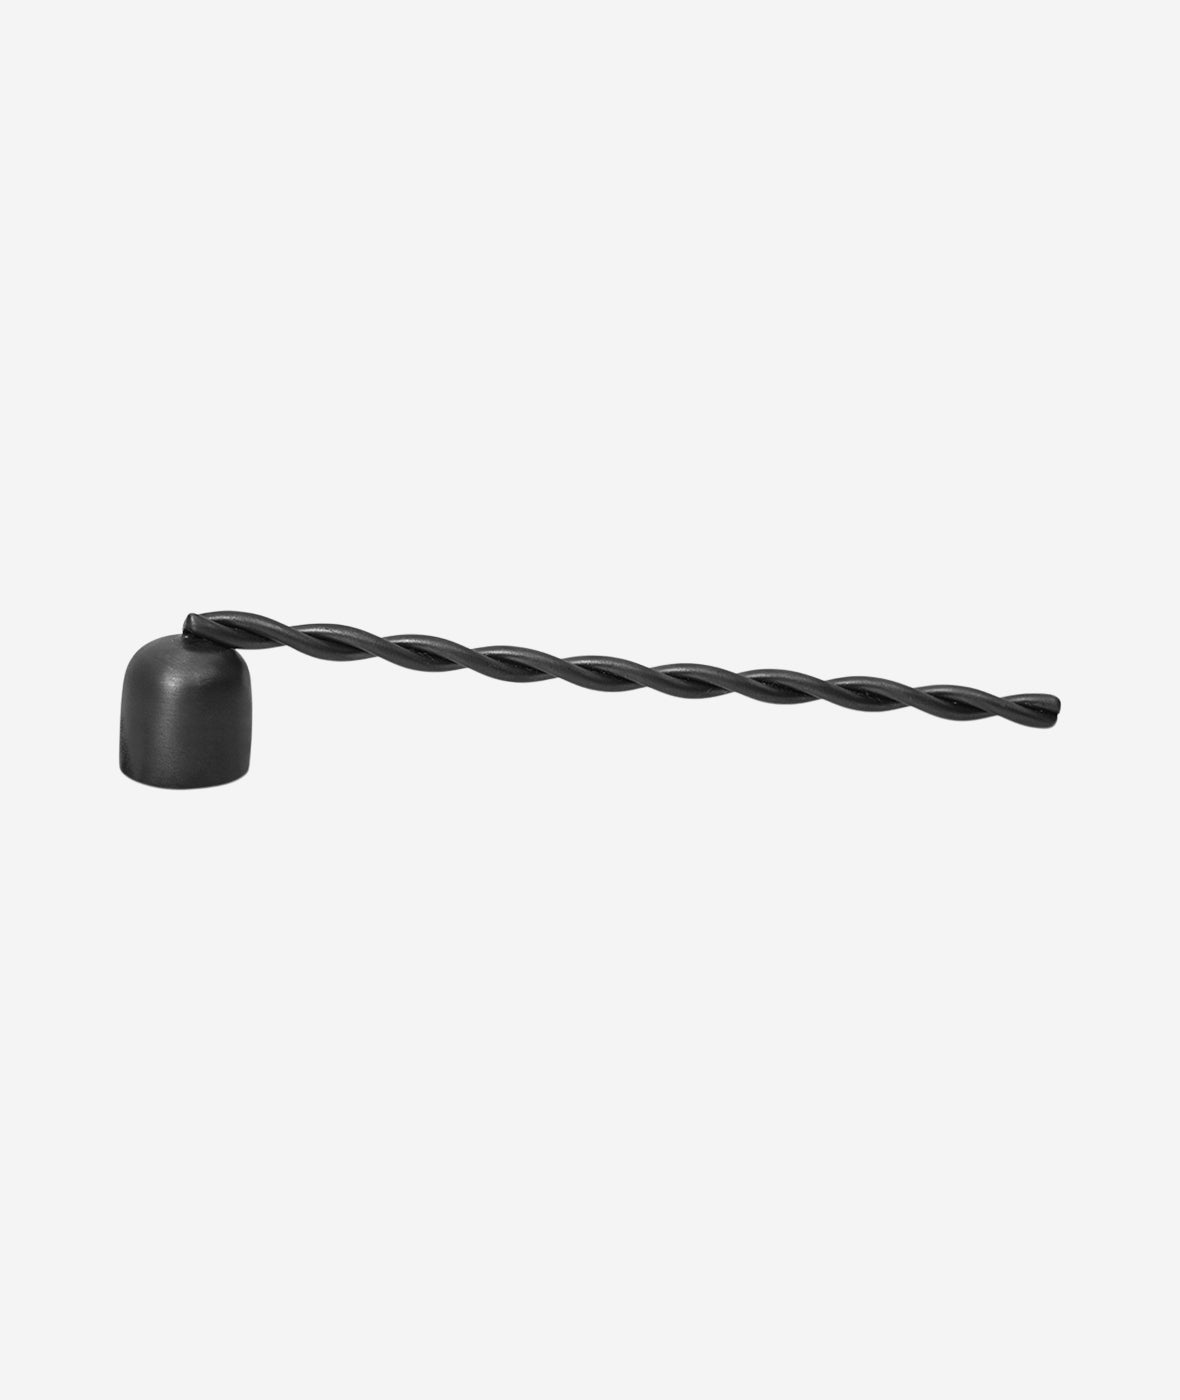 Twist Candle Snuffer - More Options